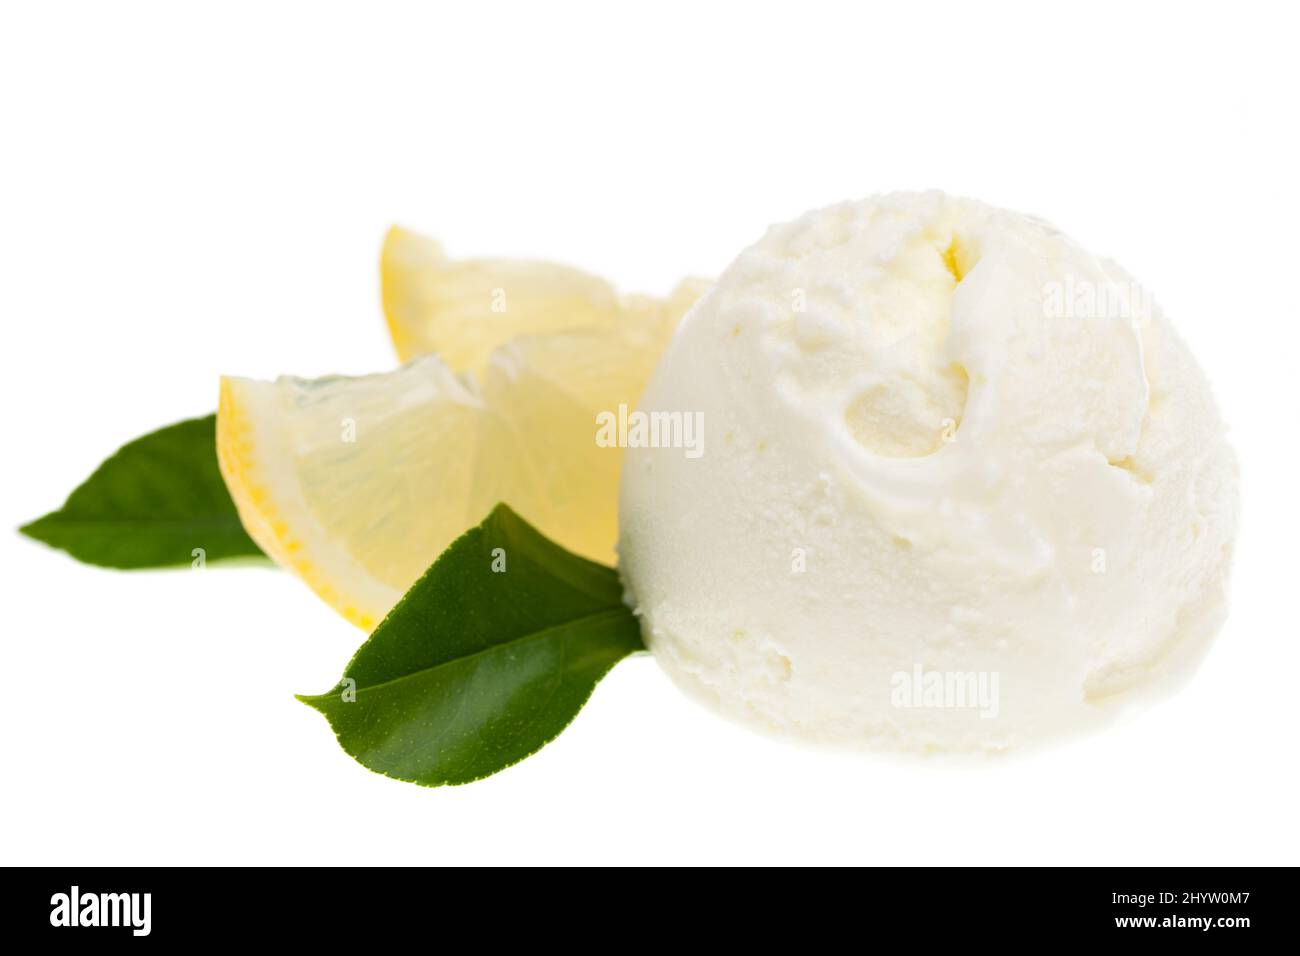 single lemon ice cream scoop from the front on a white background with lemon slices Stock Photo